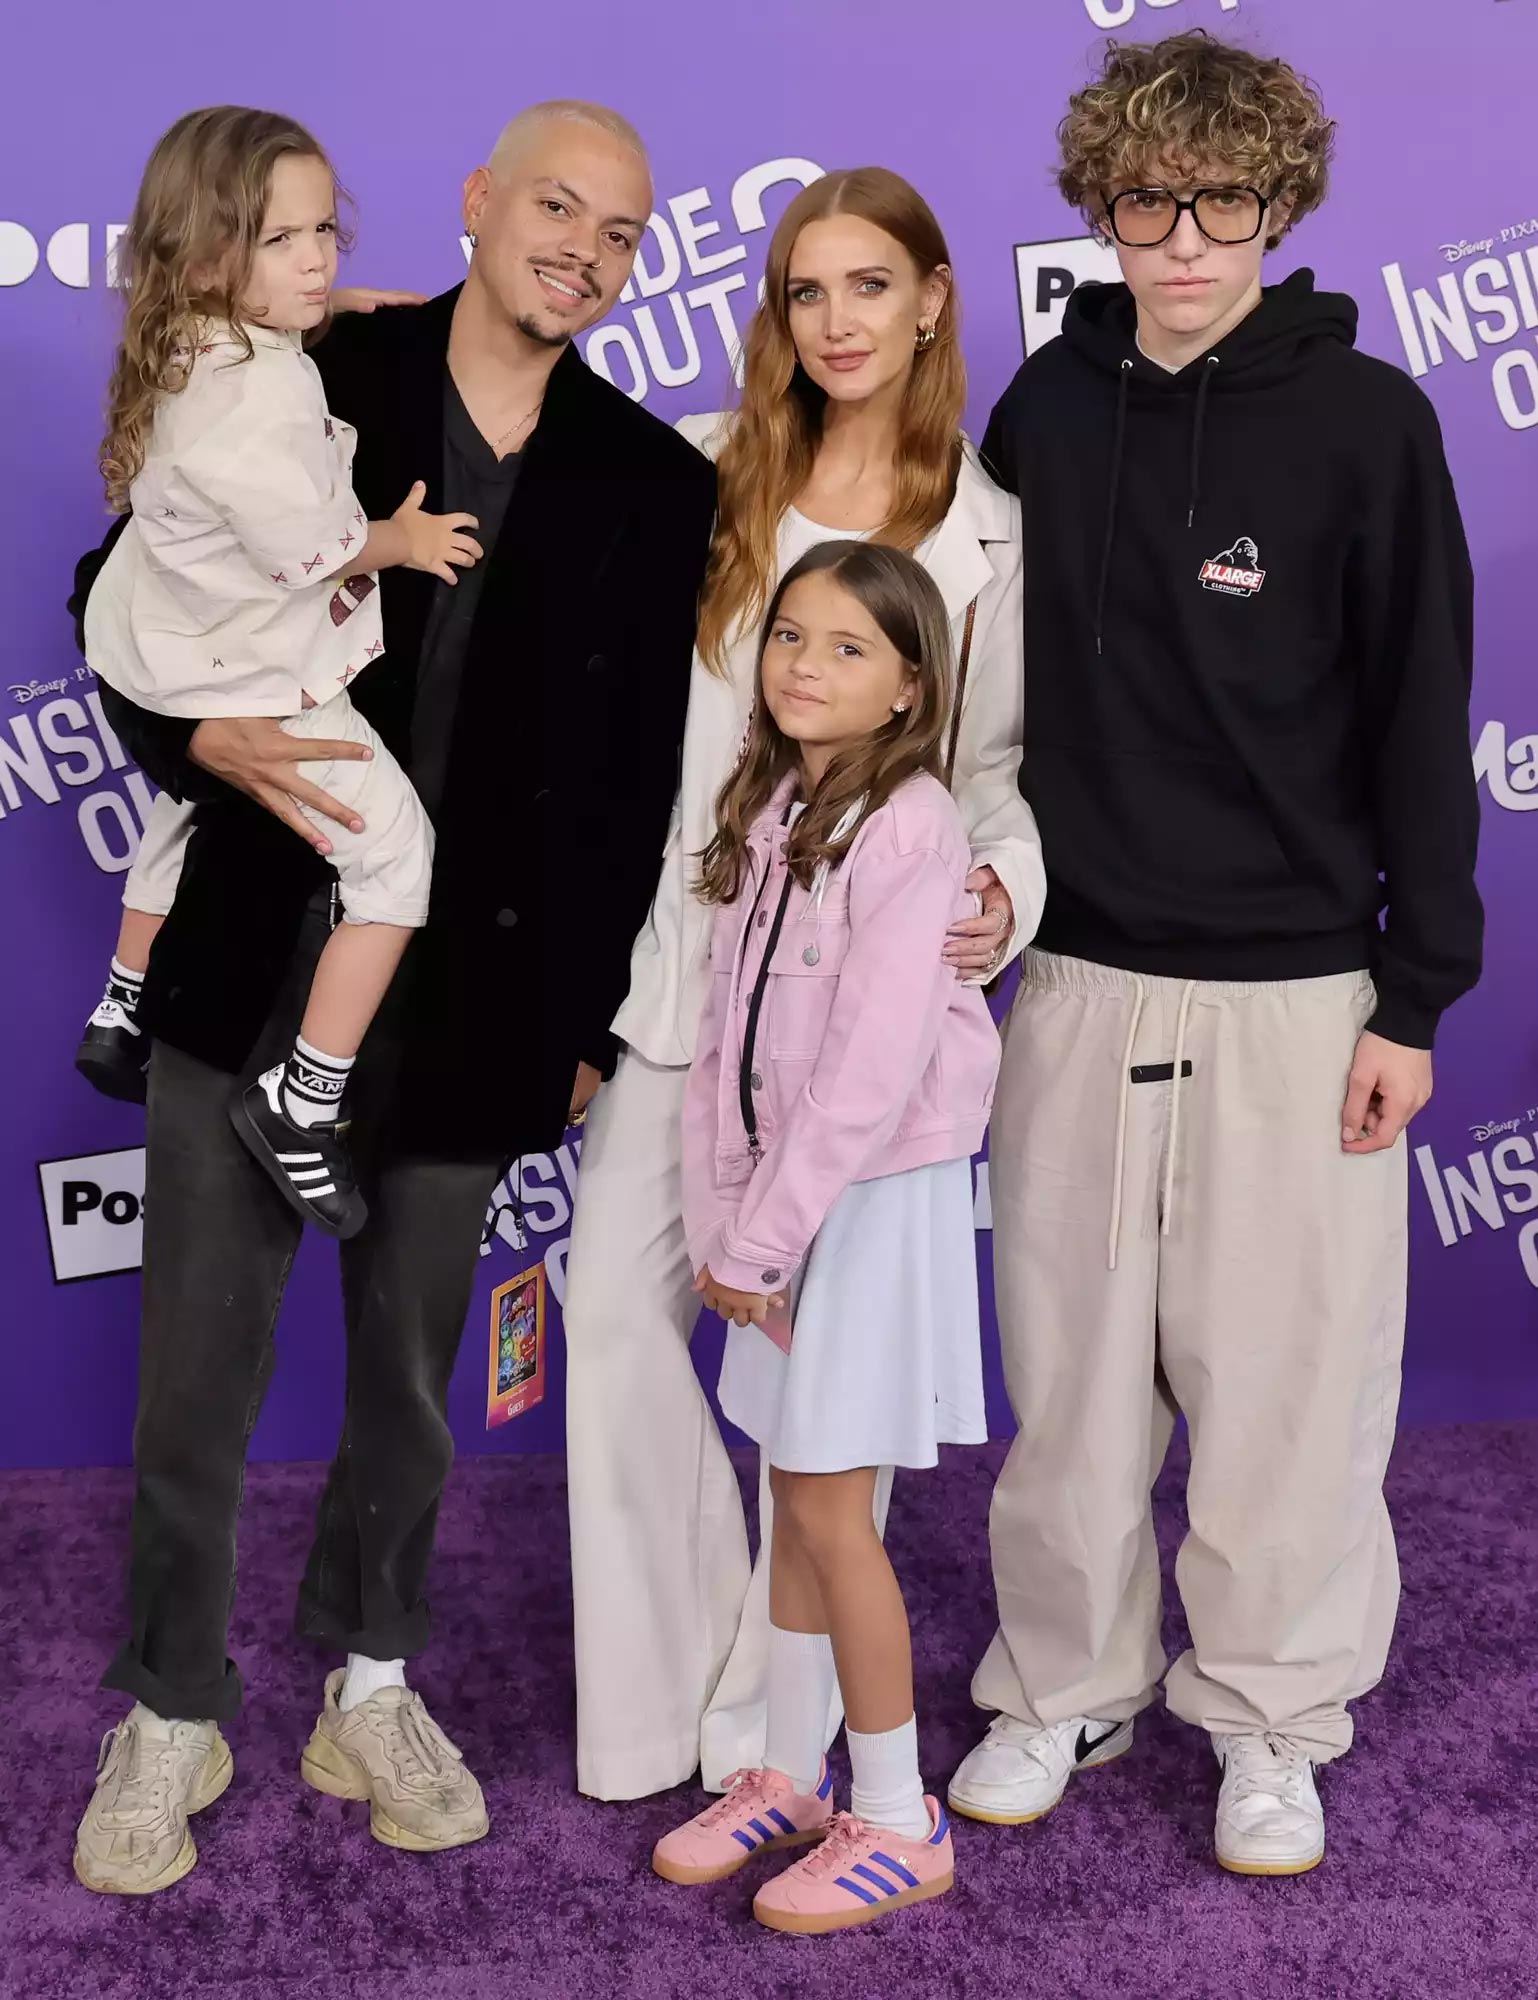 Ashlee Simpson, Evan Ross stylish family outing at Inside Out 2 premiere